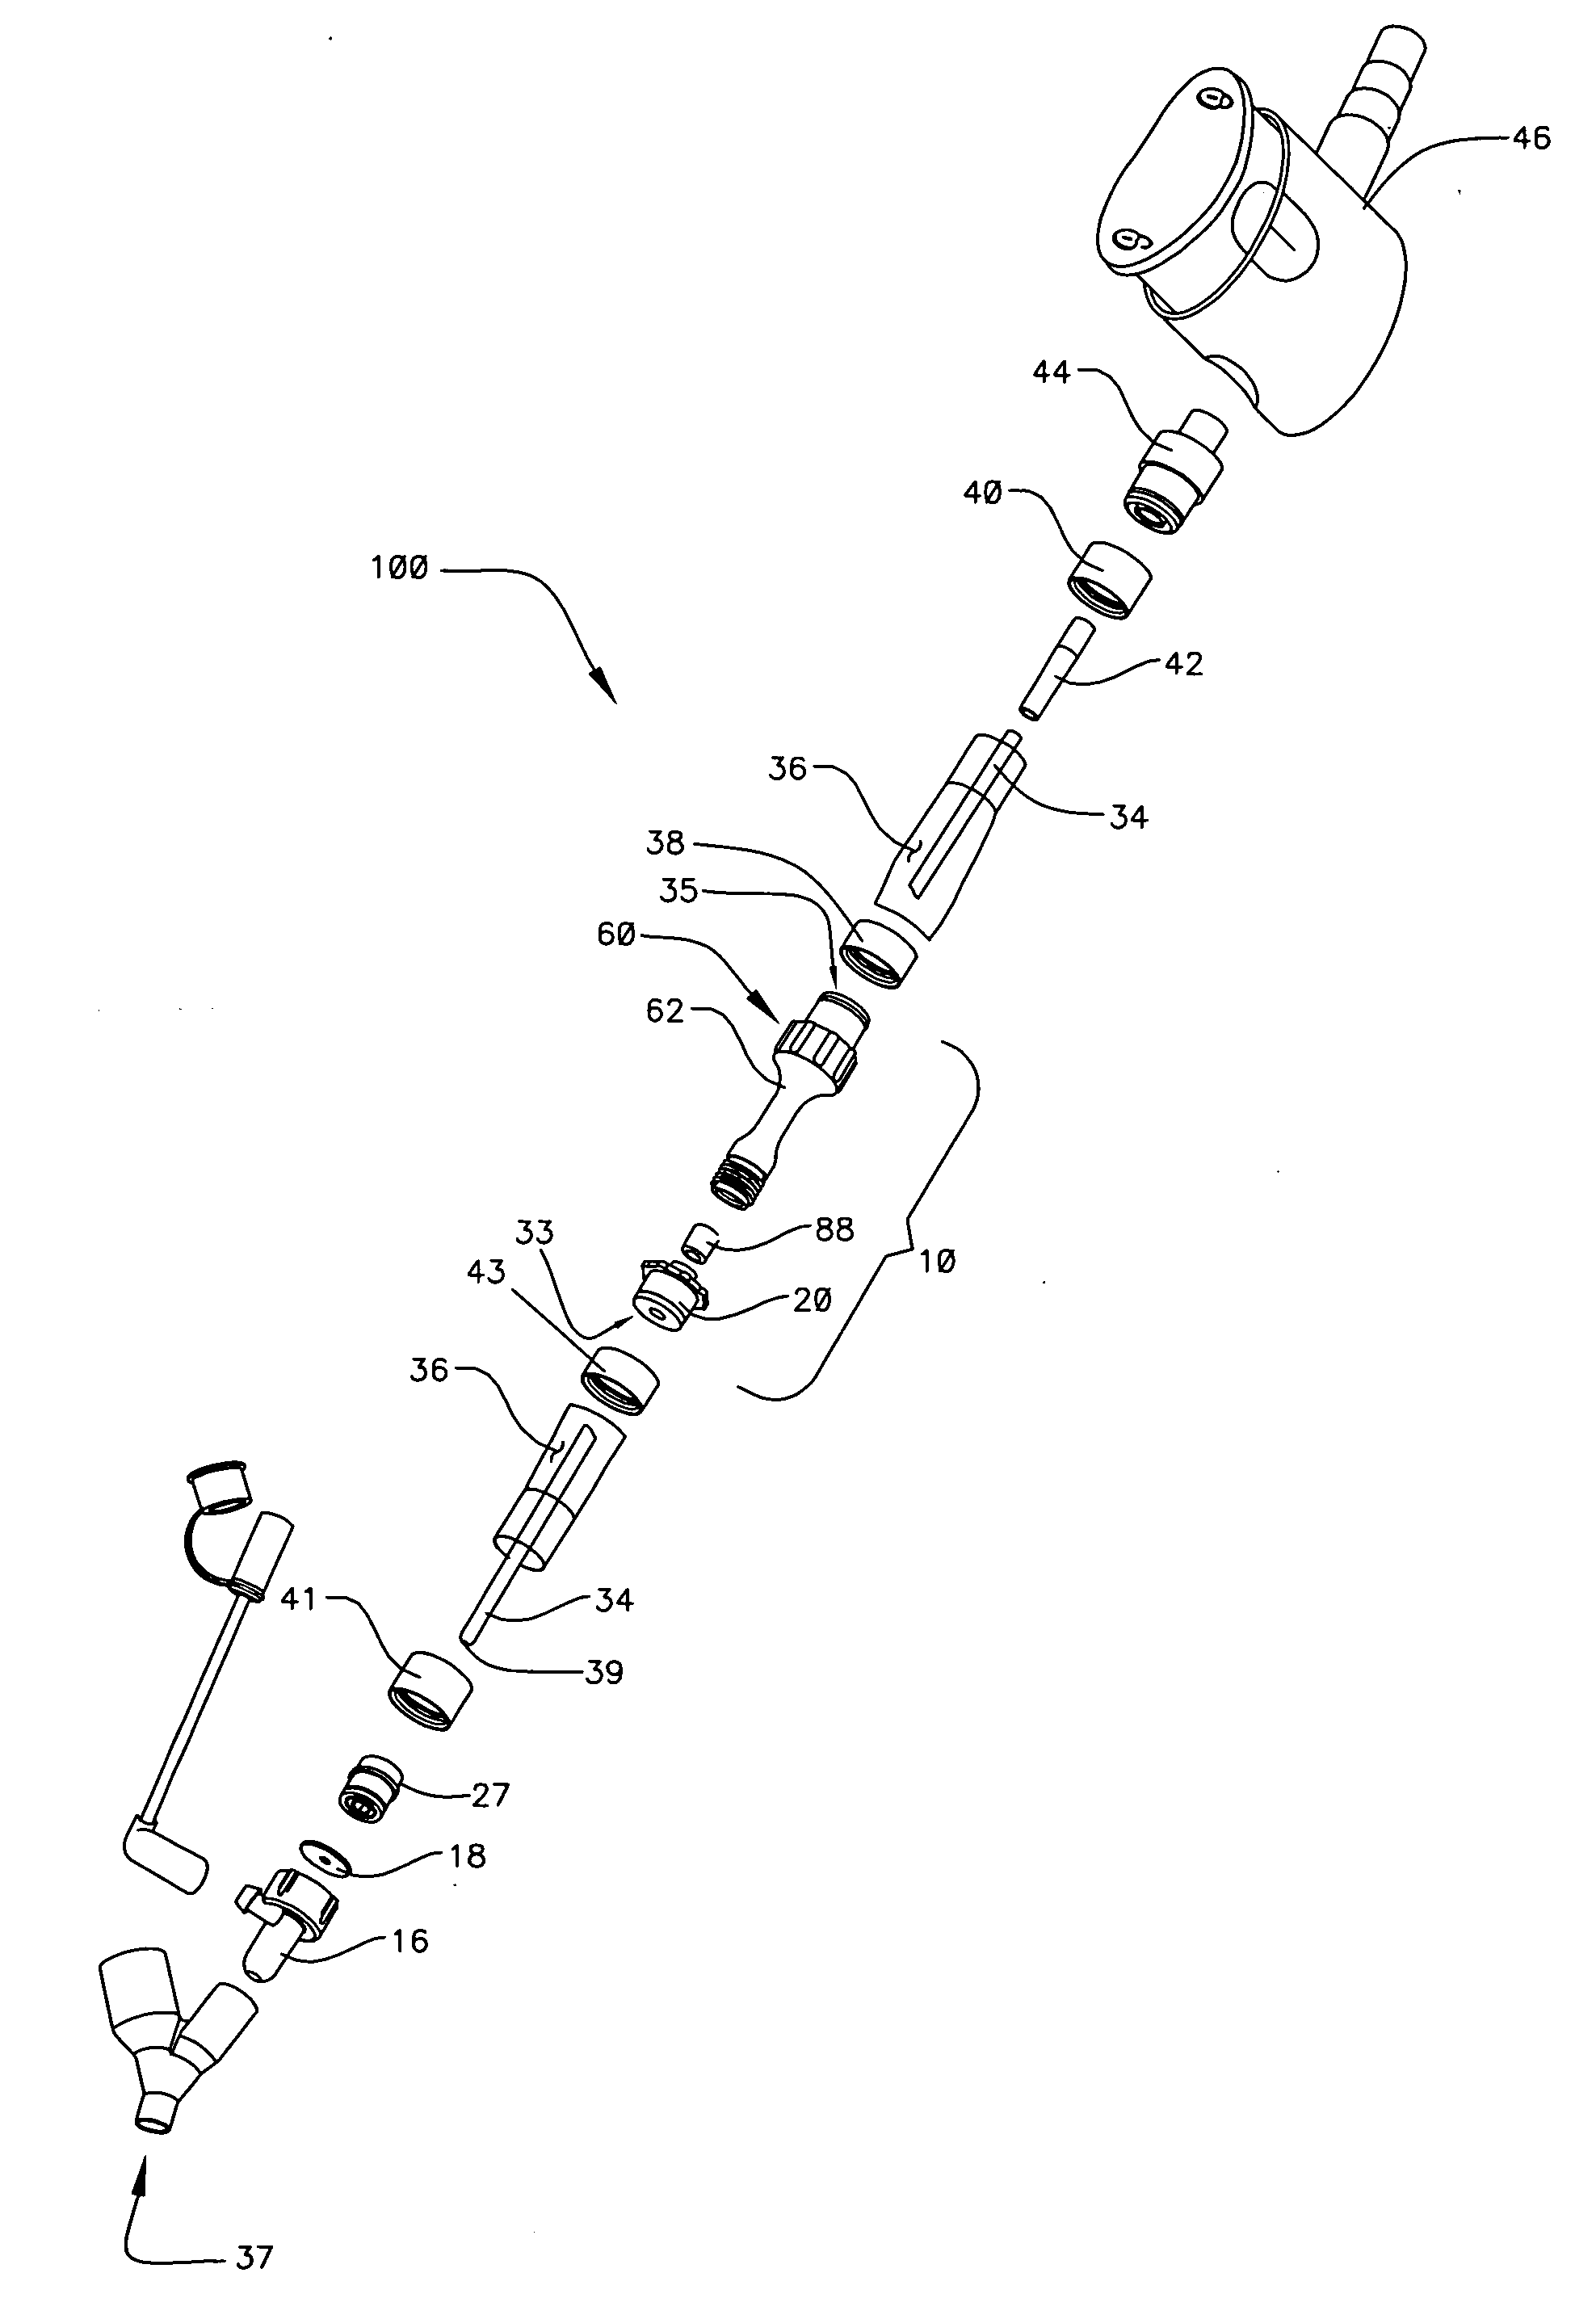 Clamping assembly for limiting the depth of insertion of a respiratory care treatment device